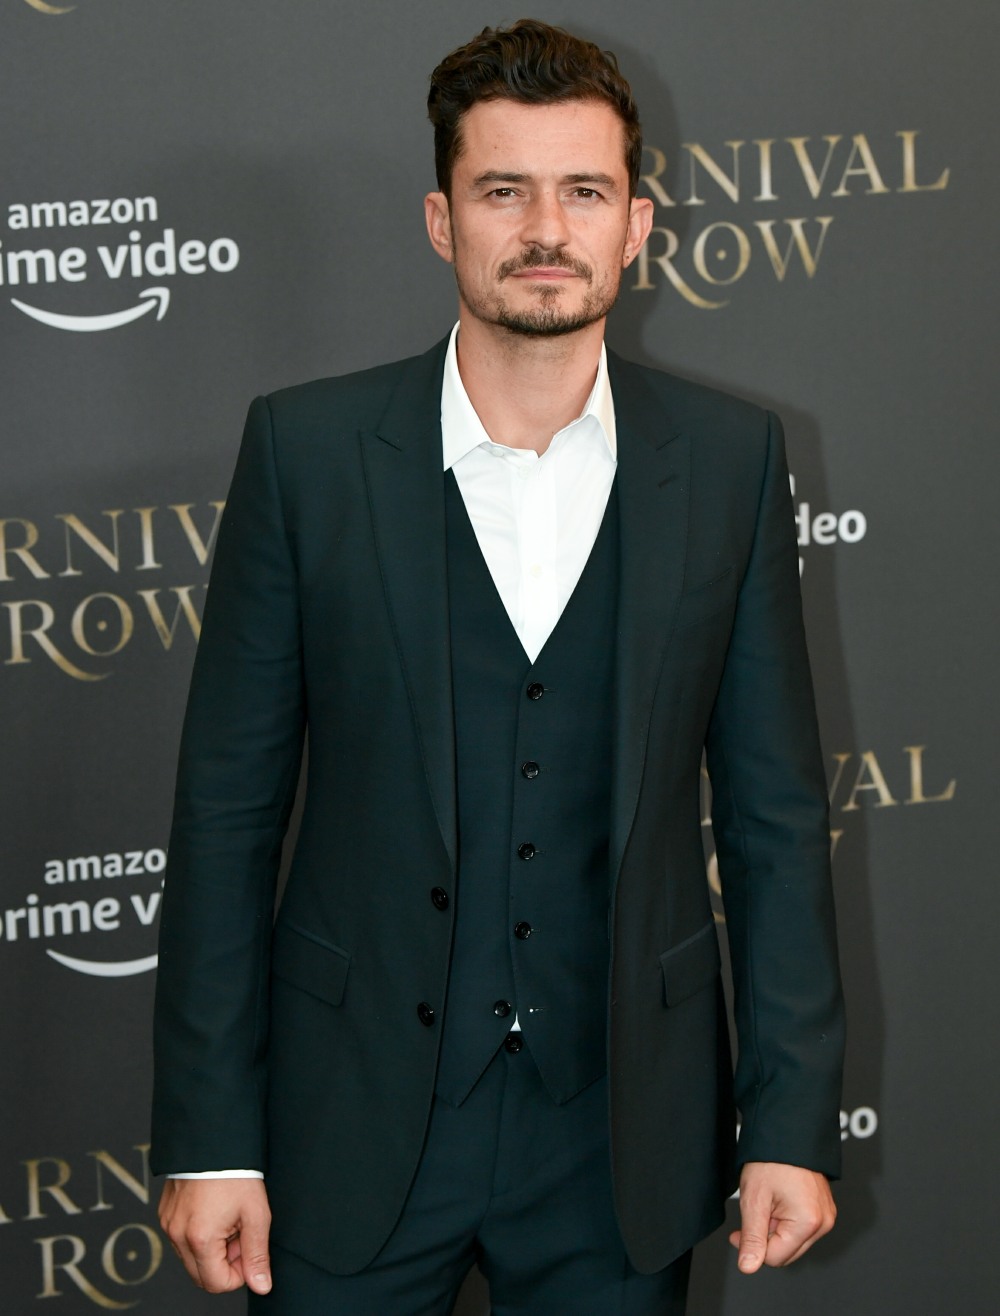 Actor Orlando Bloom comes to the Astor Film Lounge to perform the Amazon series "Carnival Row". Photo: Jens Kalaene/-Zentralbild/